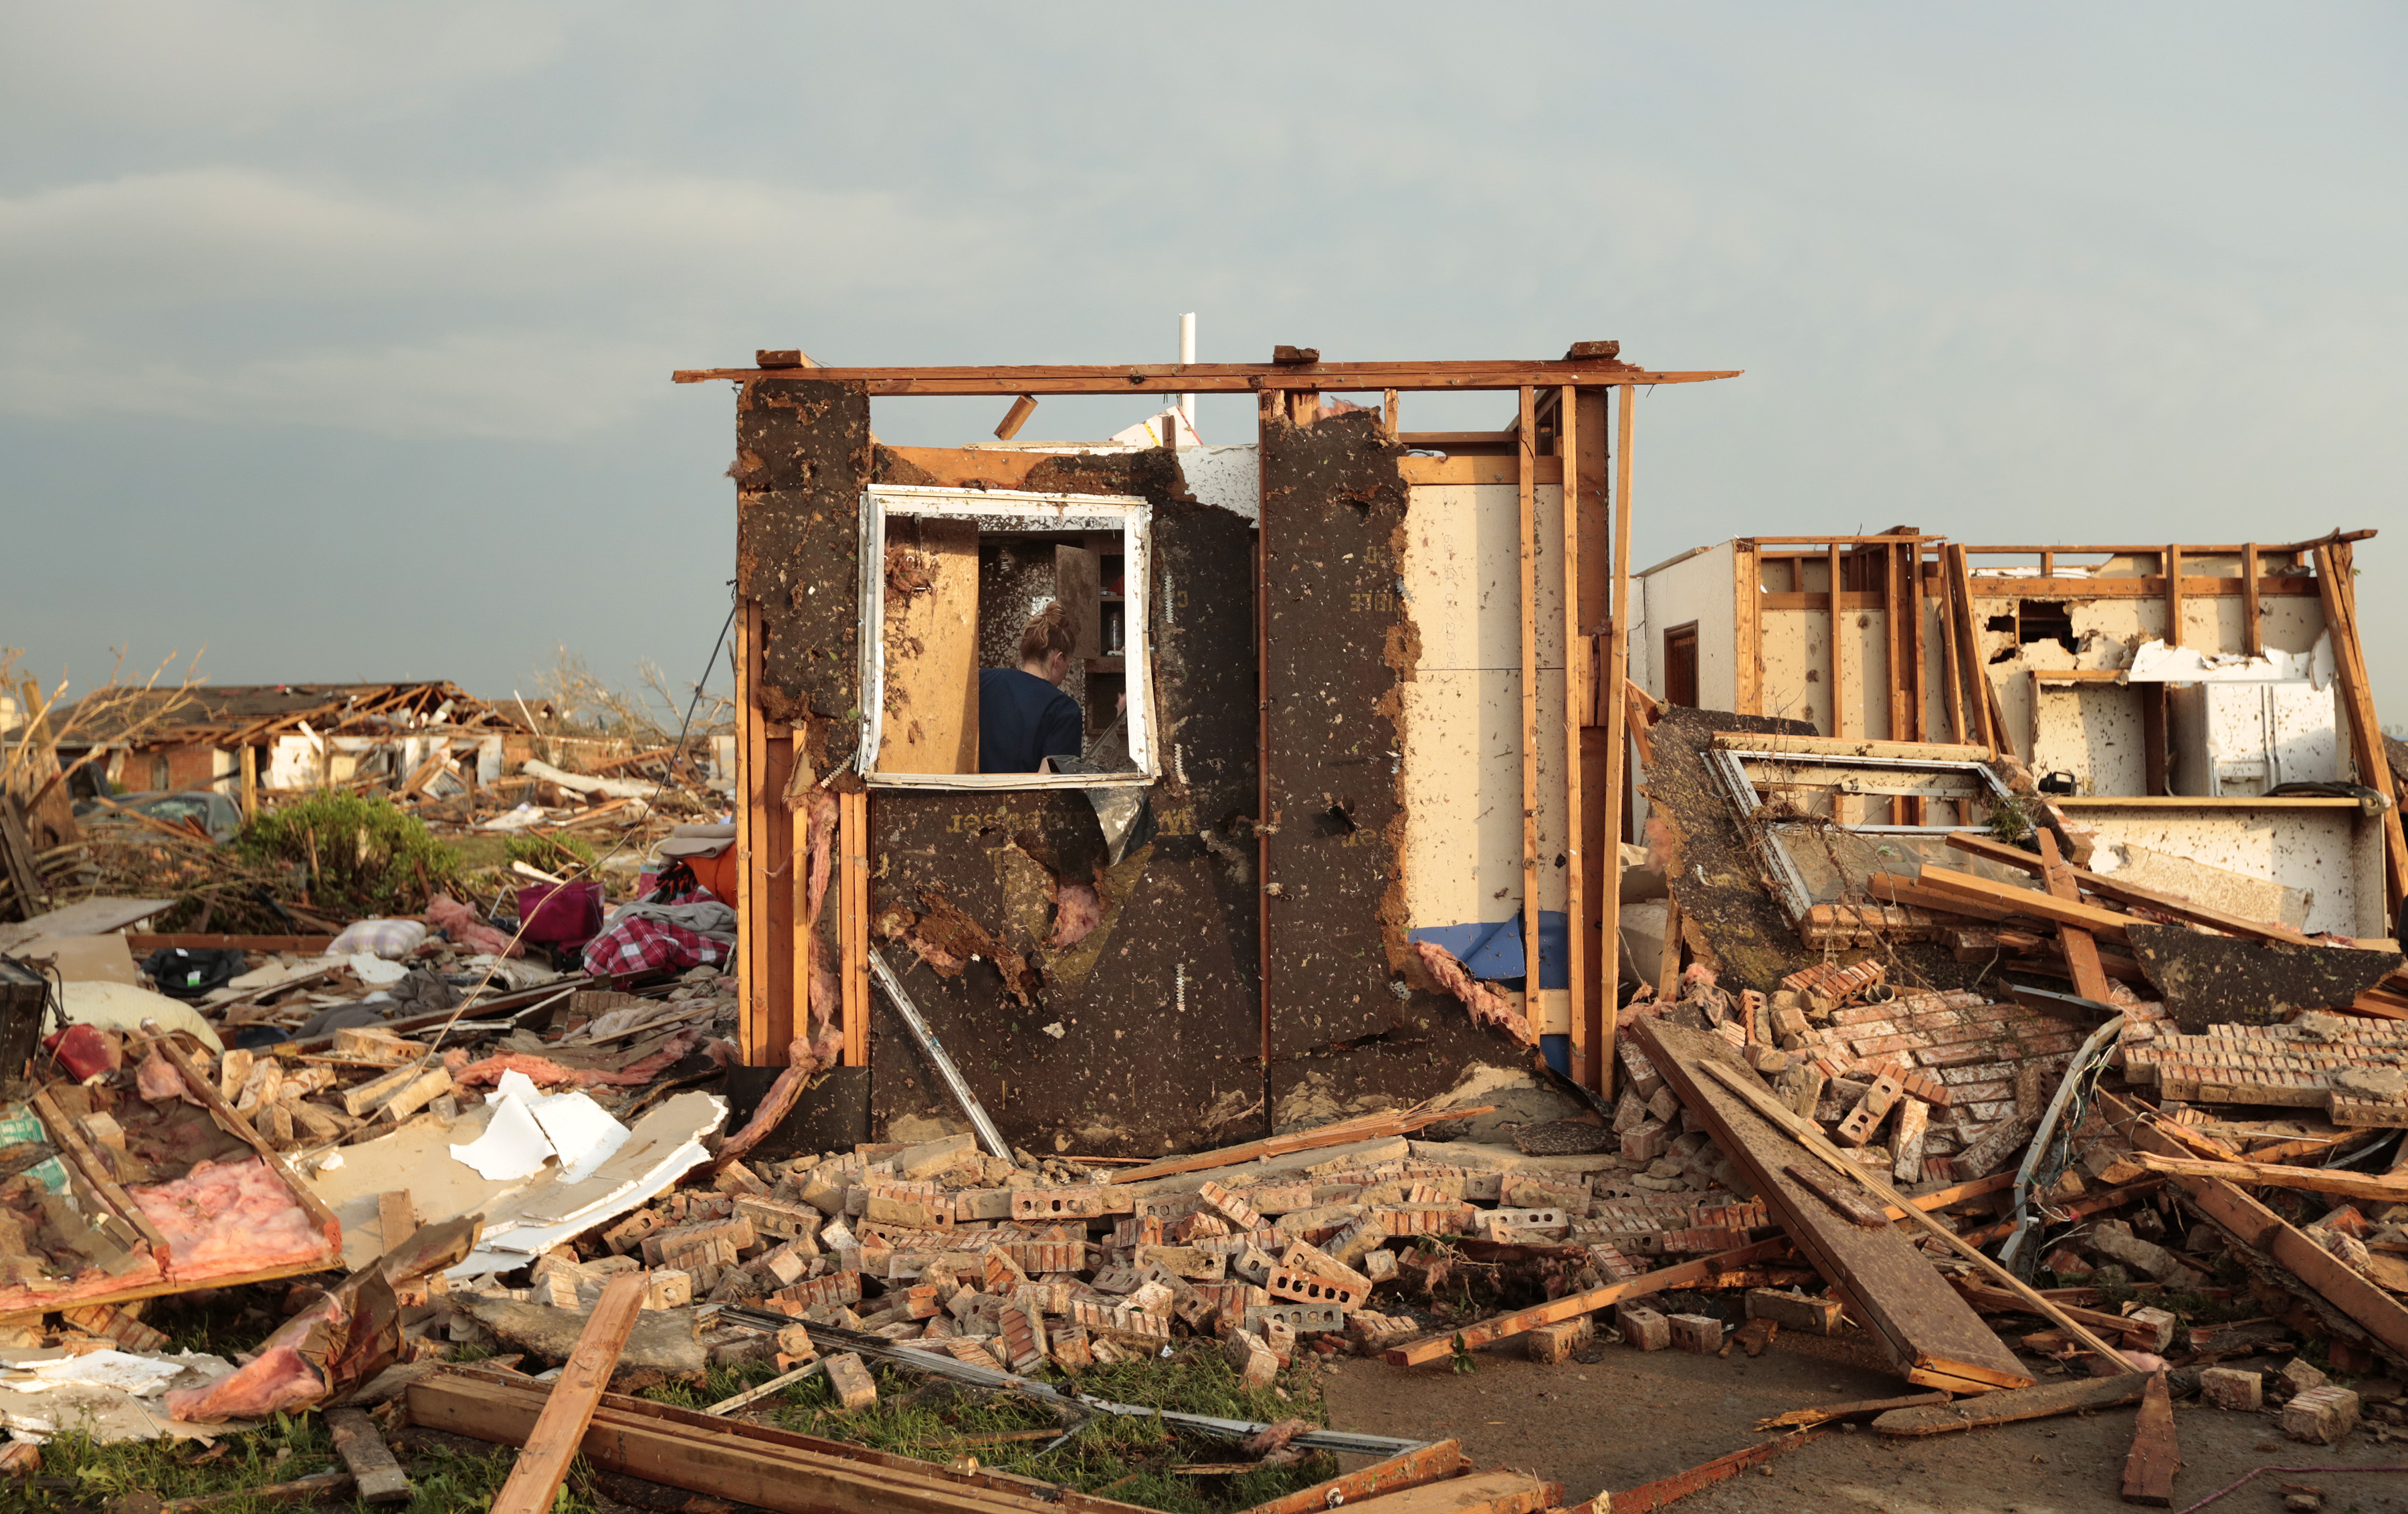 Oklahoma tornado aftermath filled with risks for victims, rescue